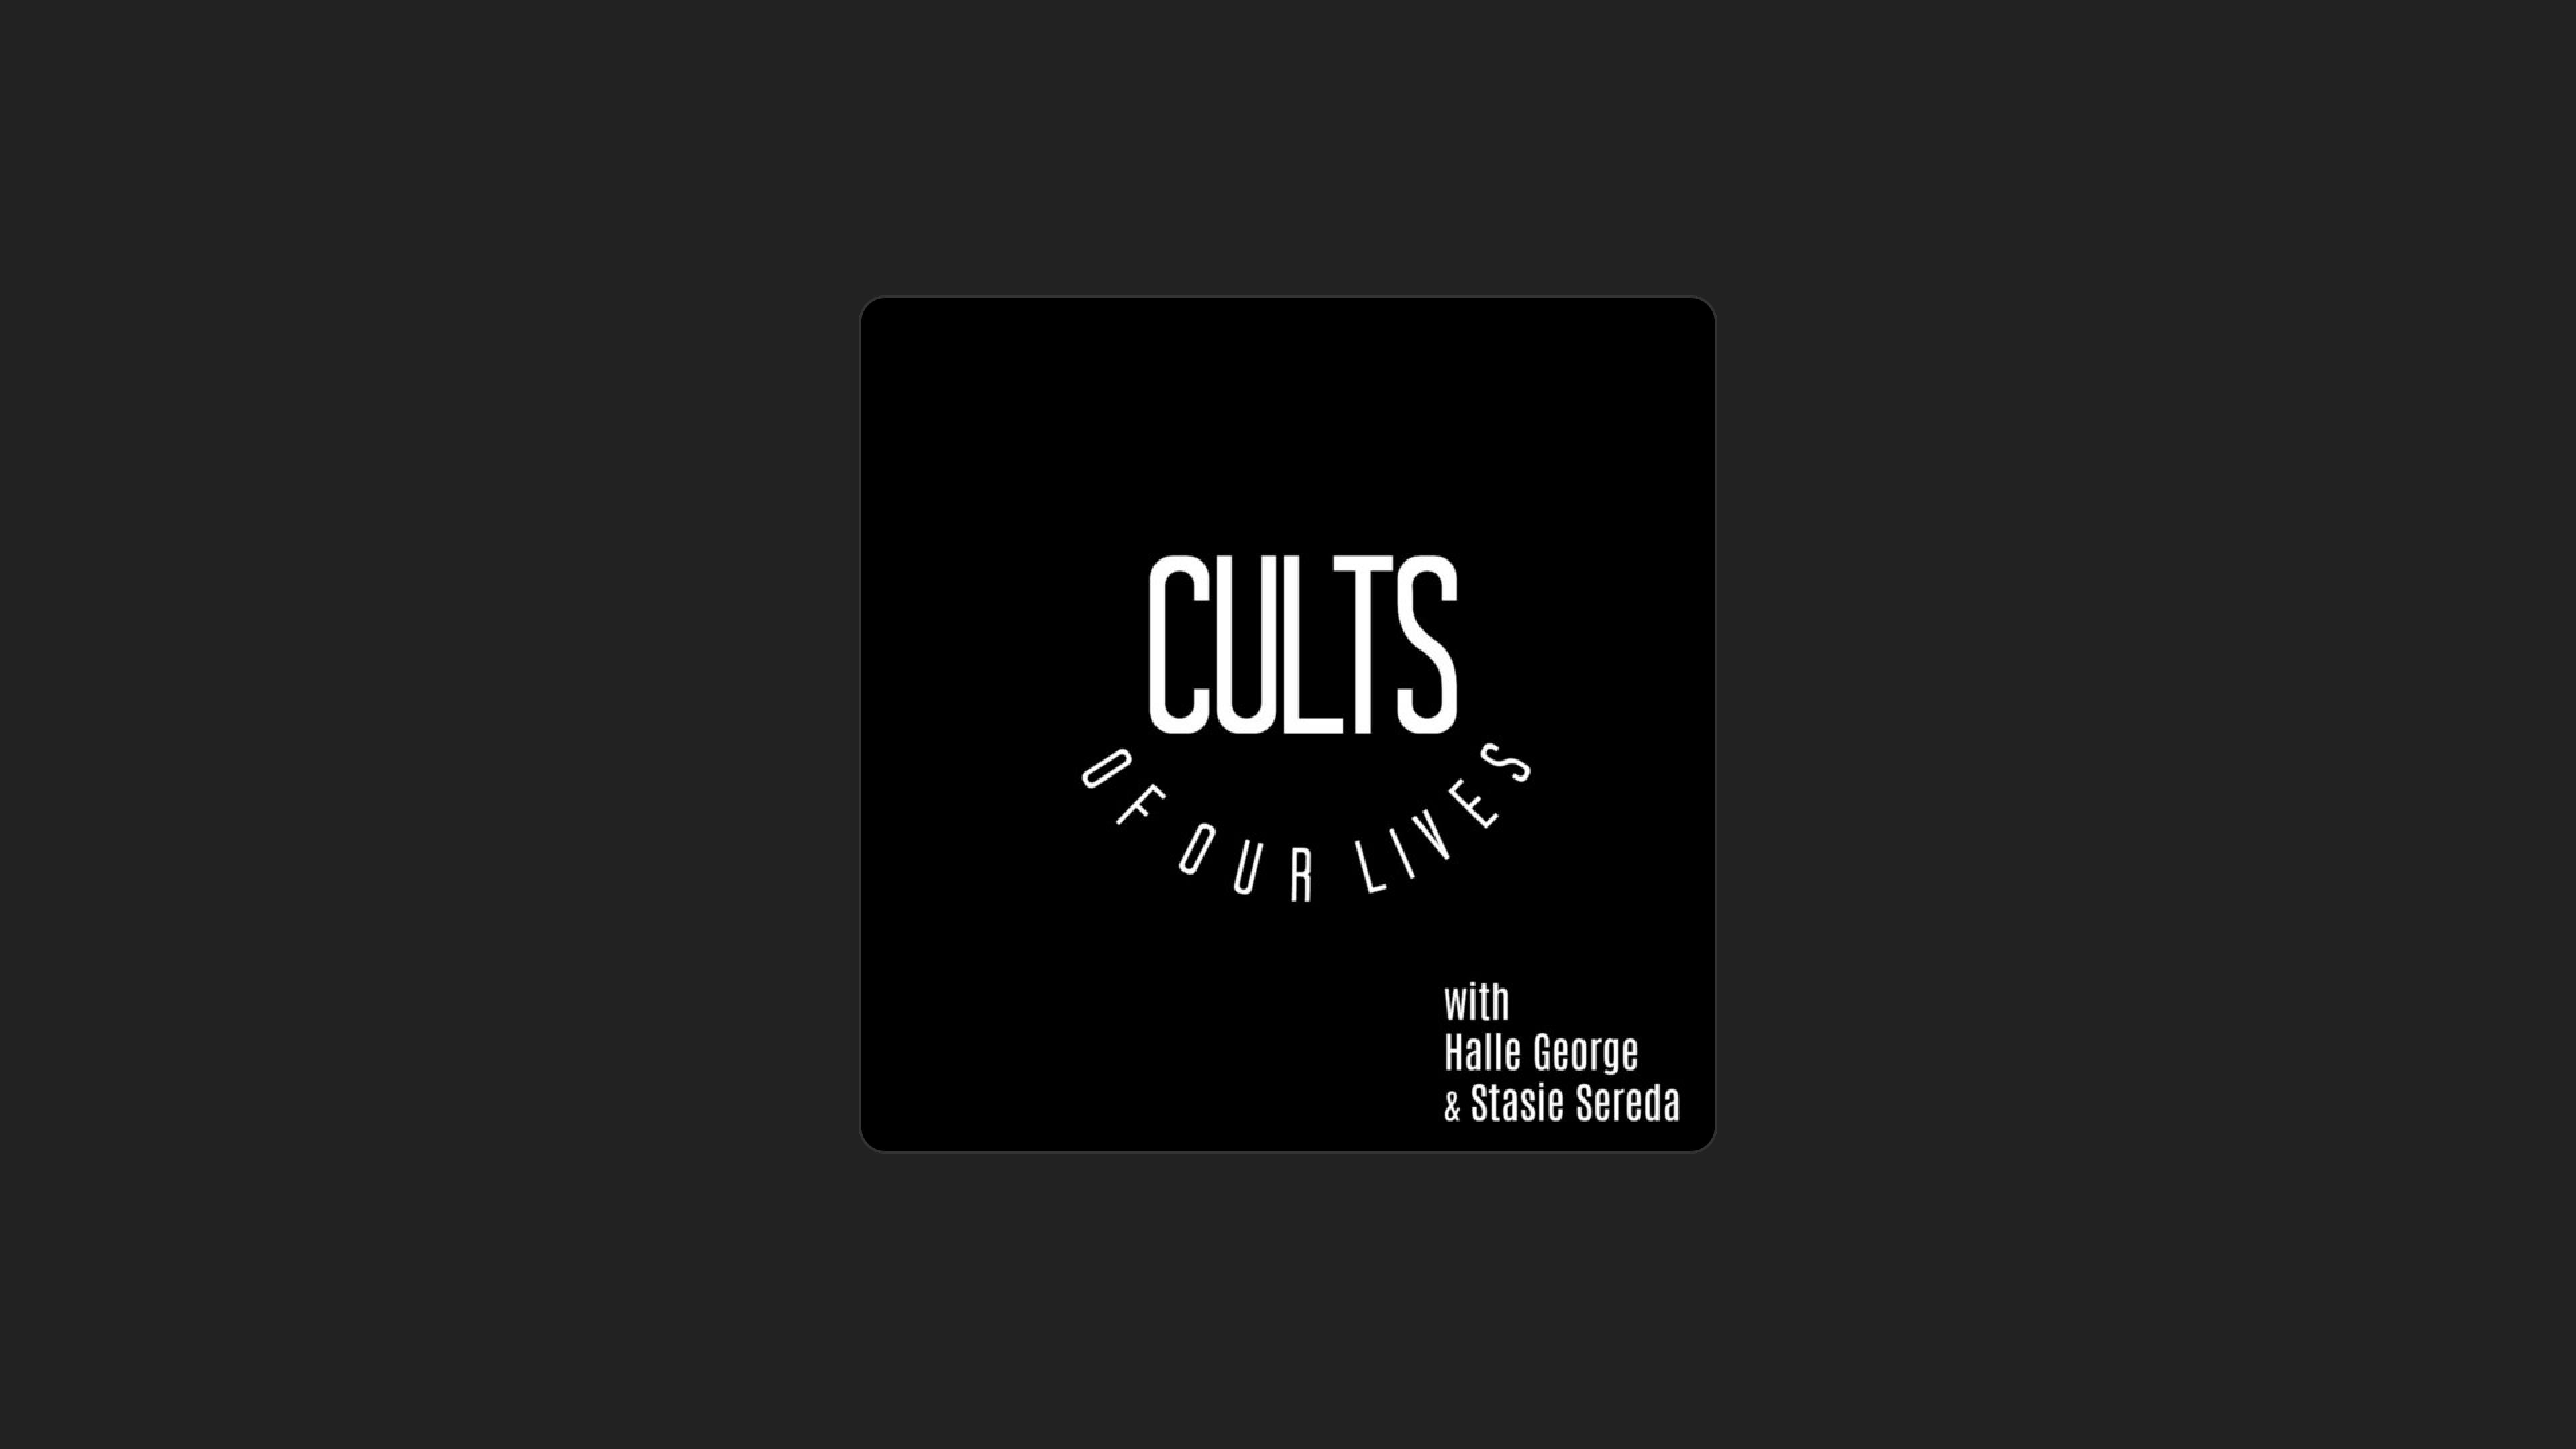 Prime podcasts focusing on cults